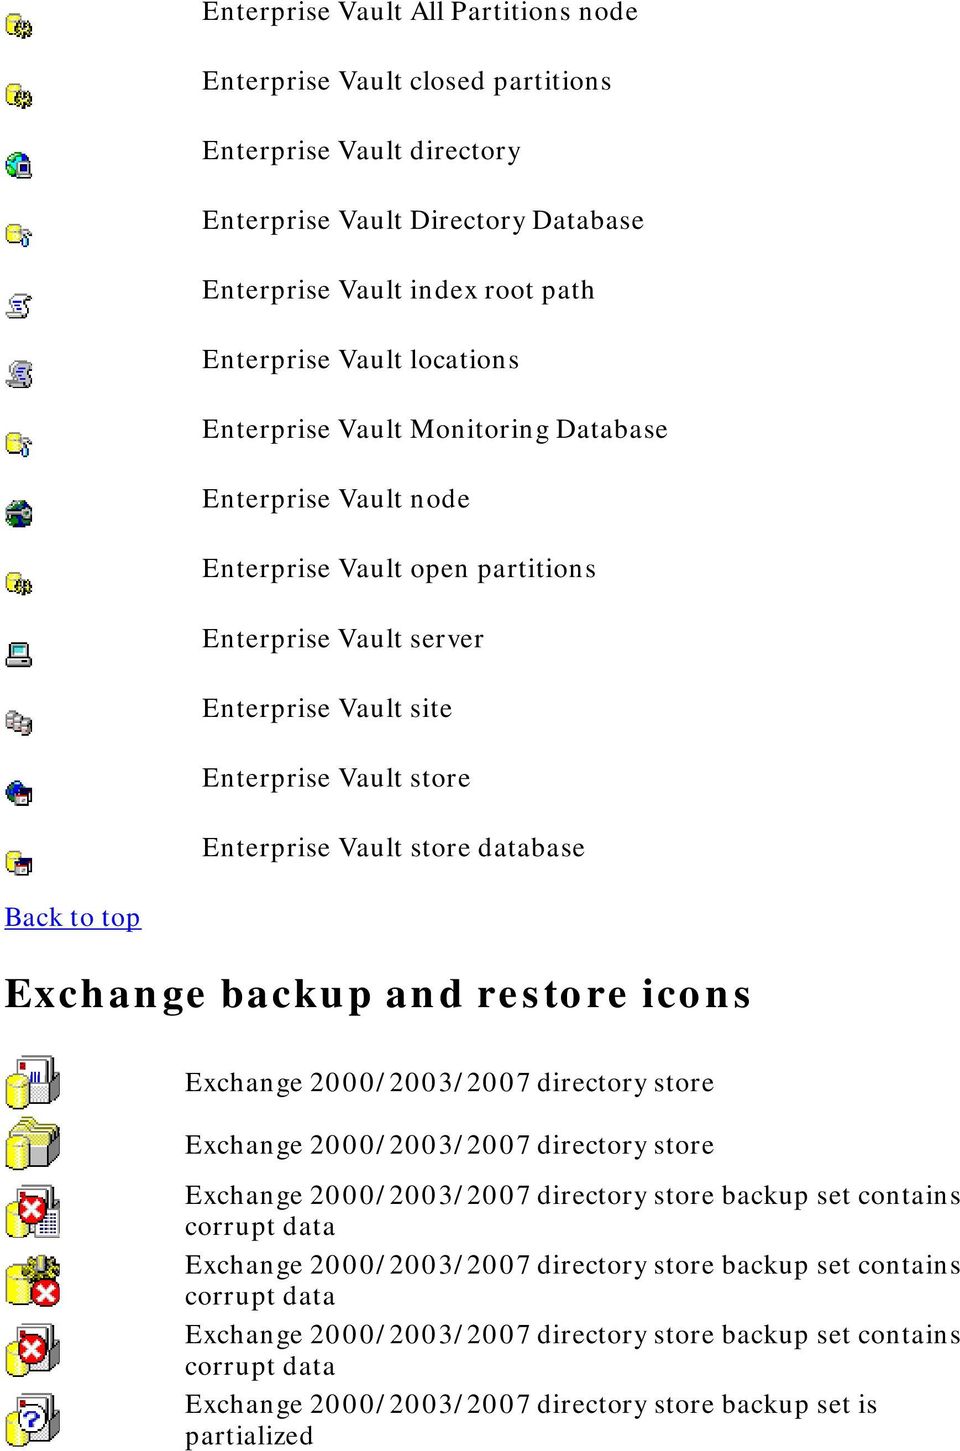 Exchange backup and restore icons Exchange 2000/2003/2007 directory store Exchange 2000/2003/2007 directory store Exchange 2000/2003/2007 directory store backup set contains corrupt data Exchange